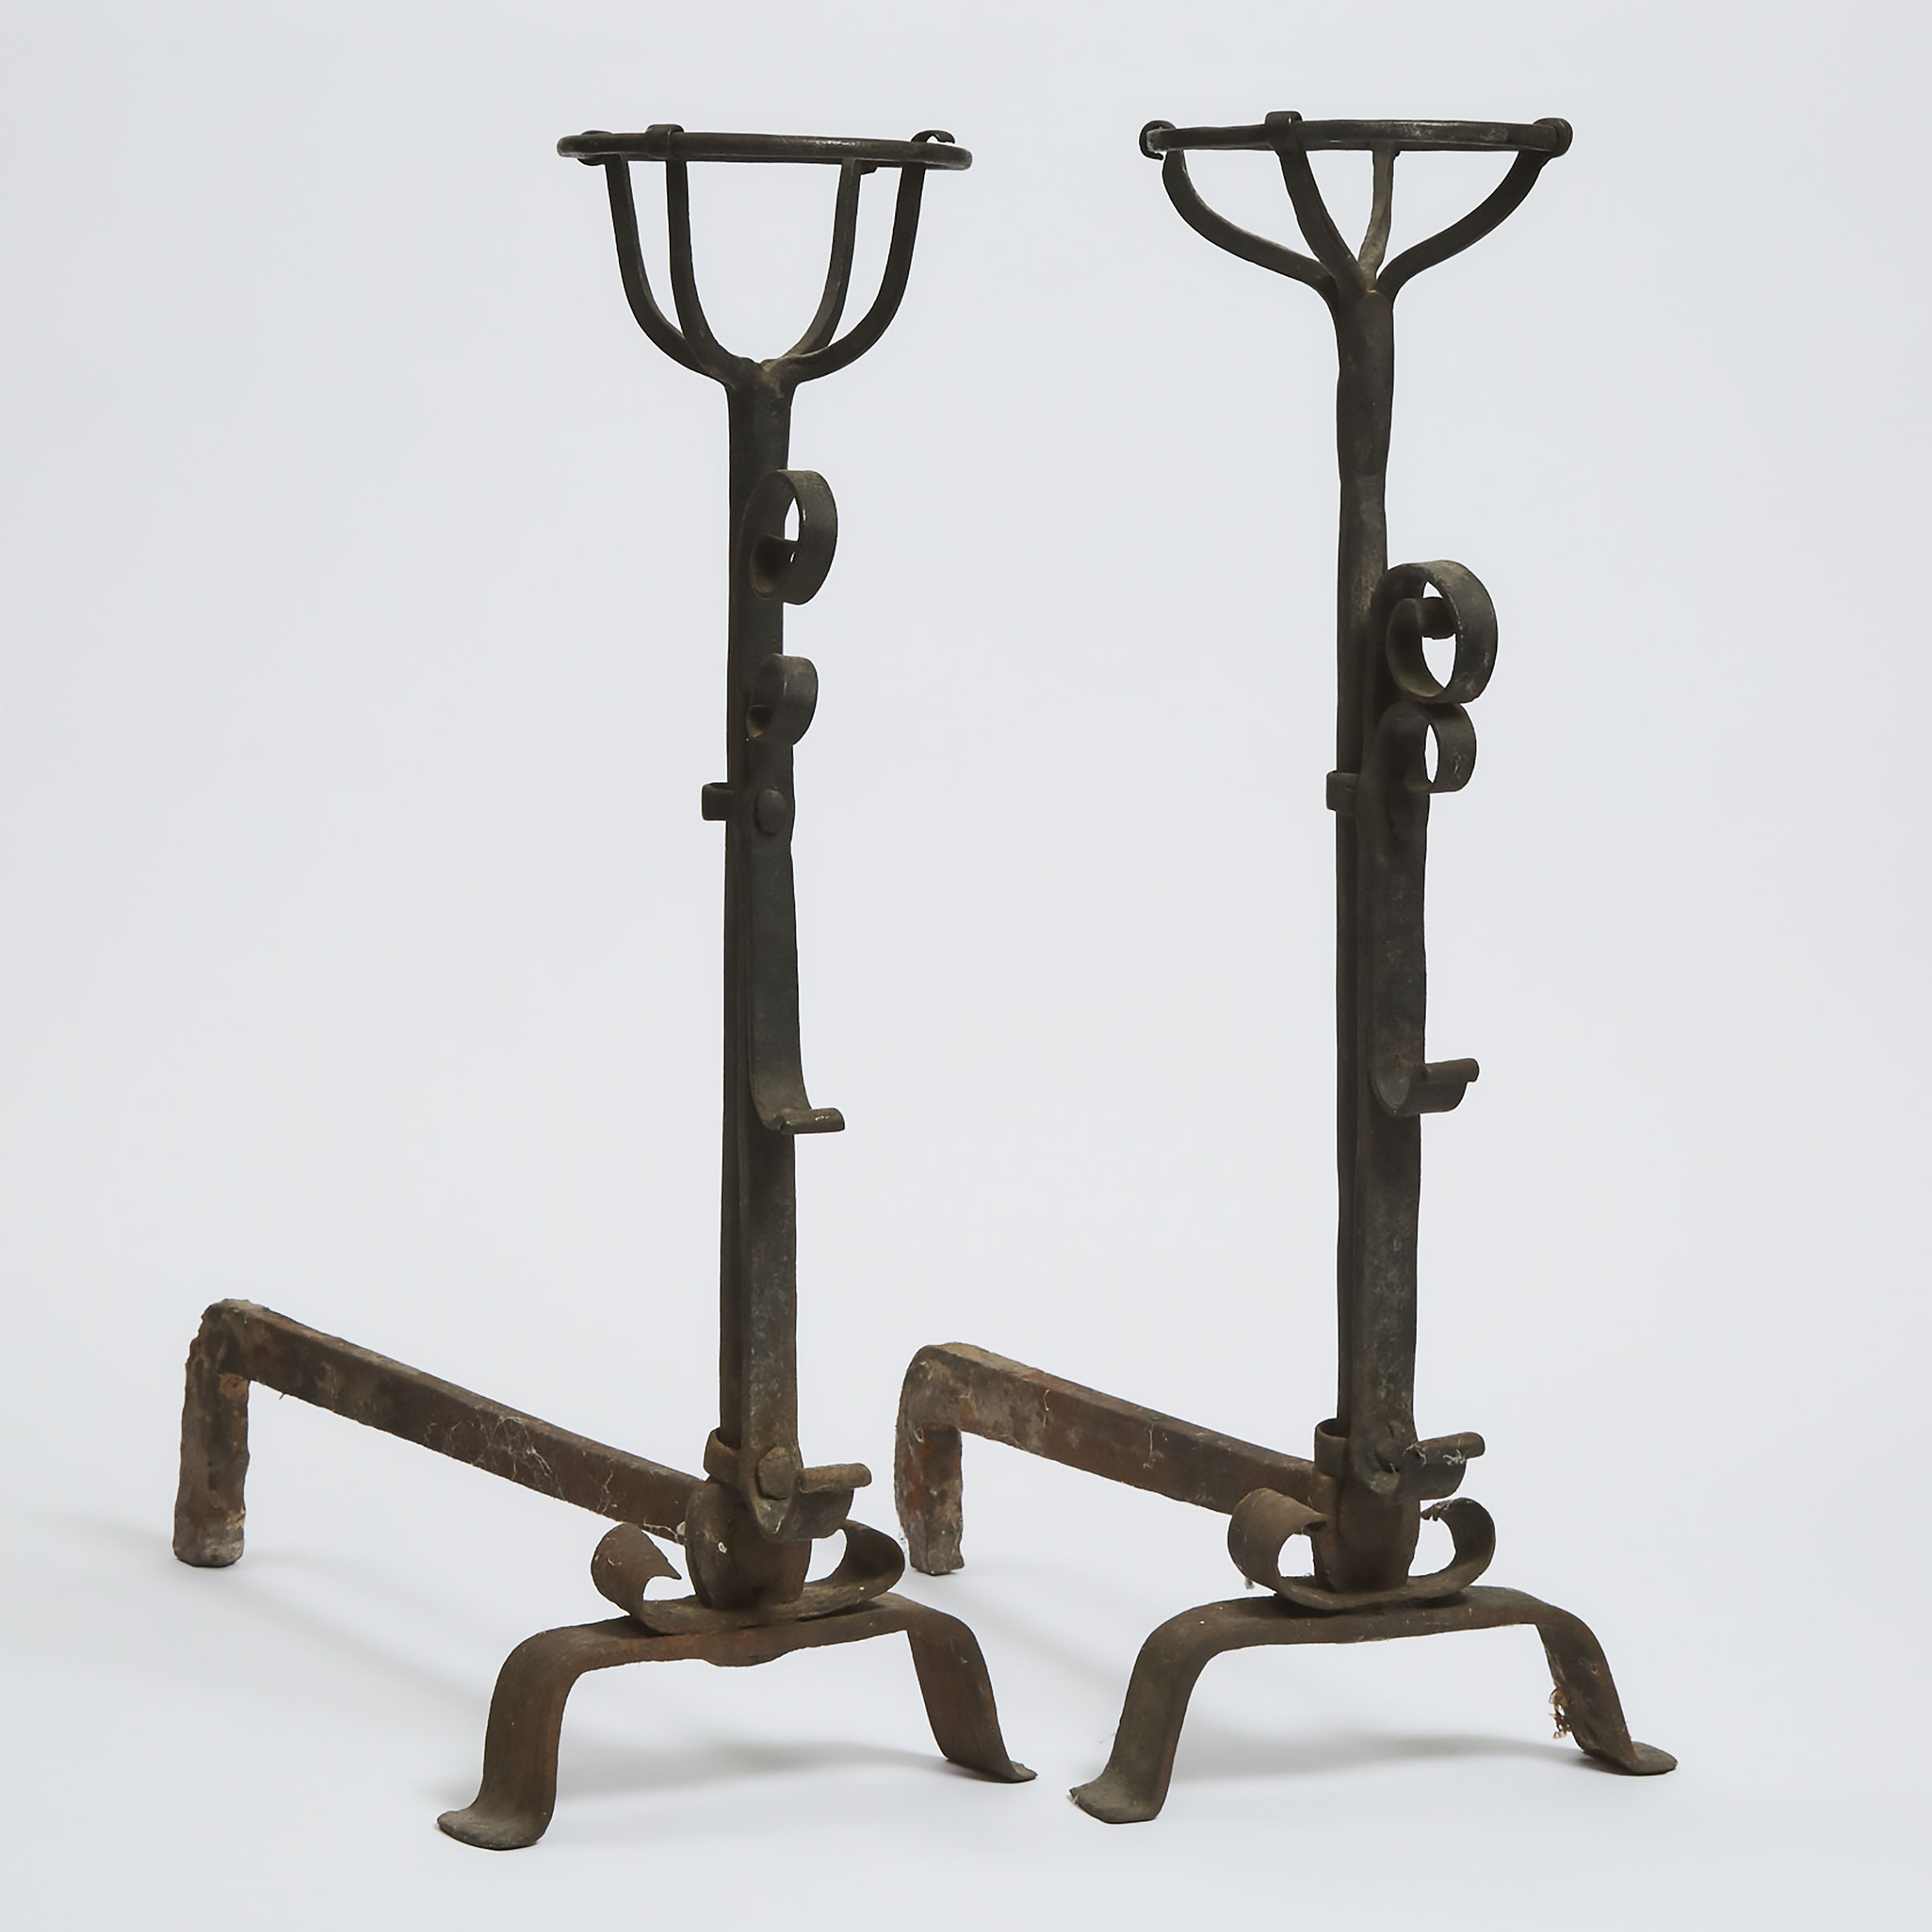 Matched Pair of Wrought Iron Basket Top 'Spitdog' Andirons